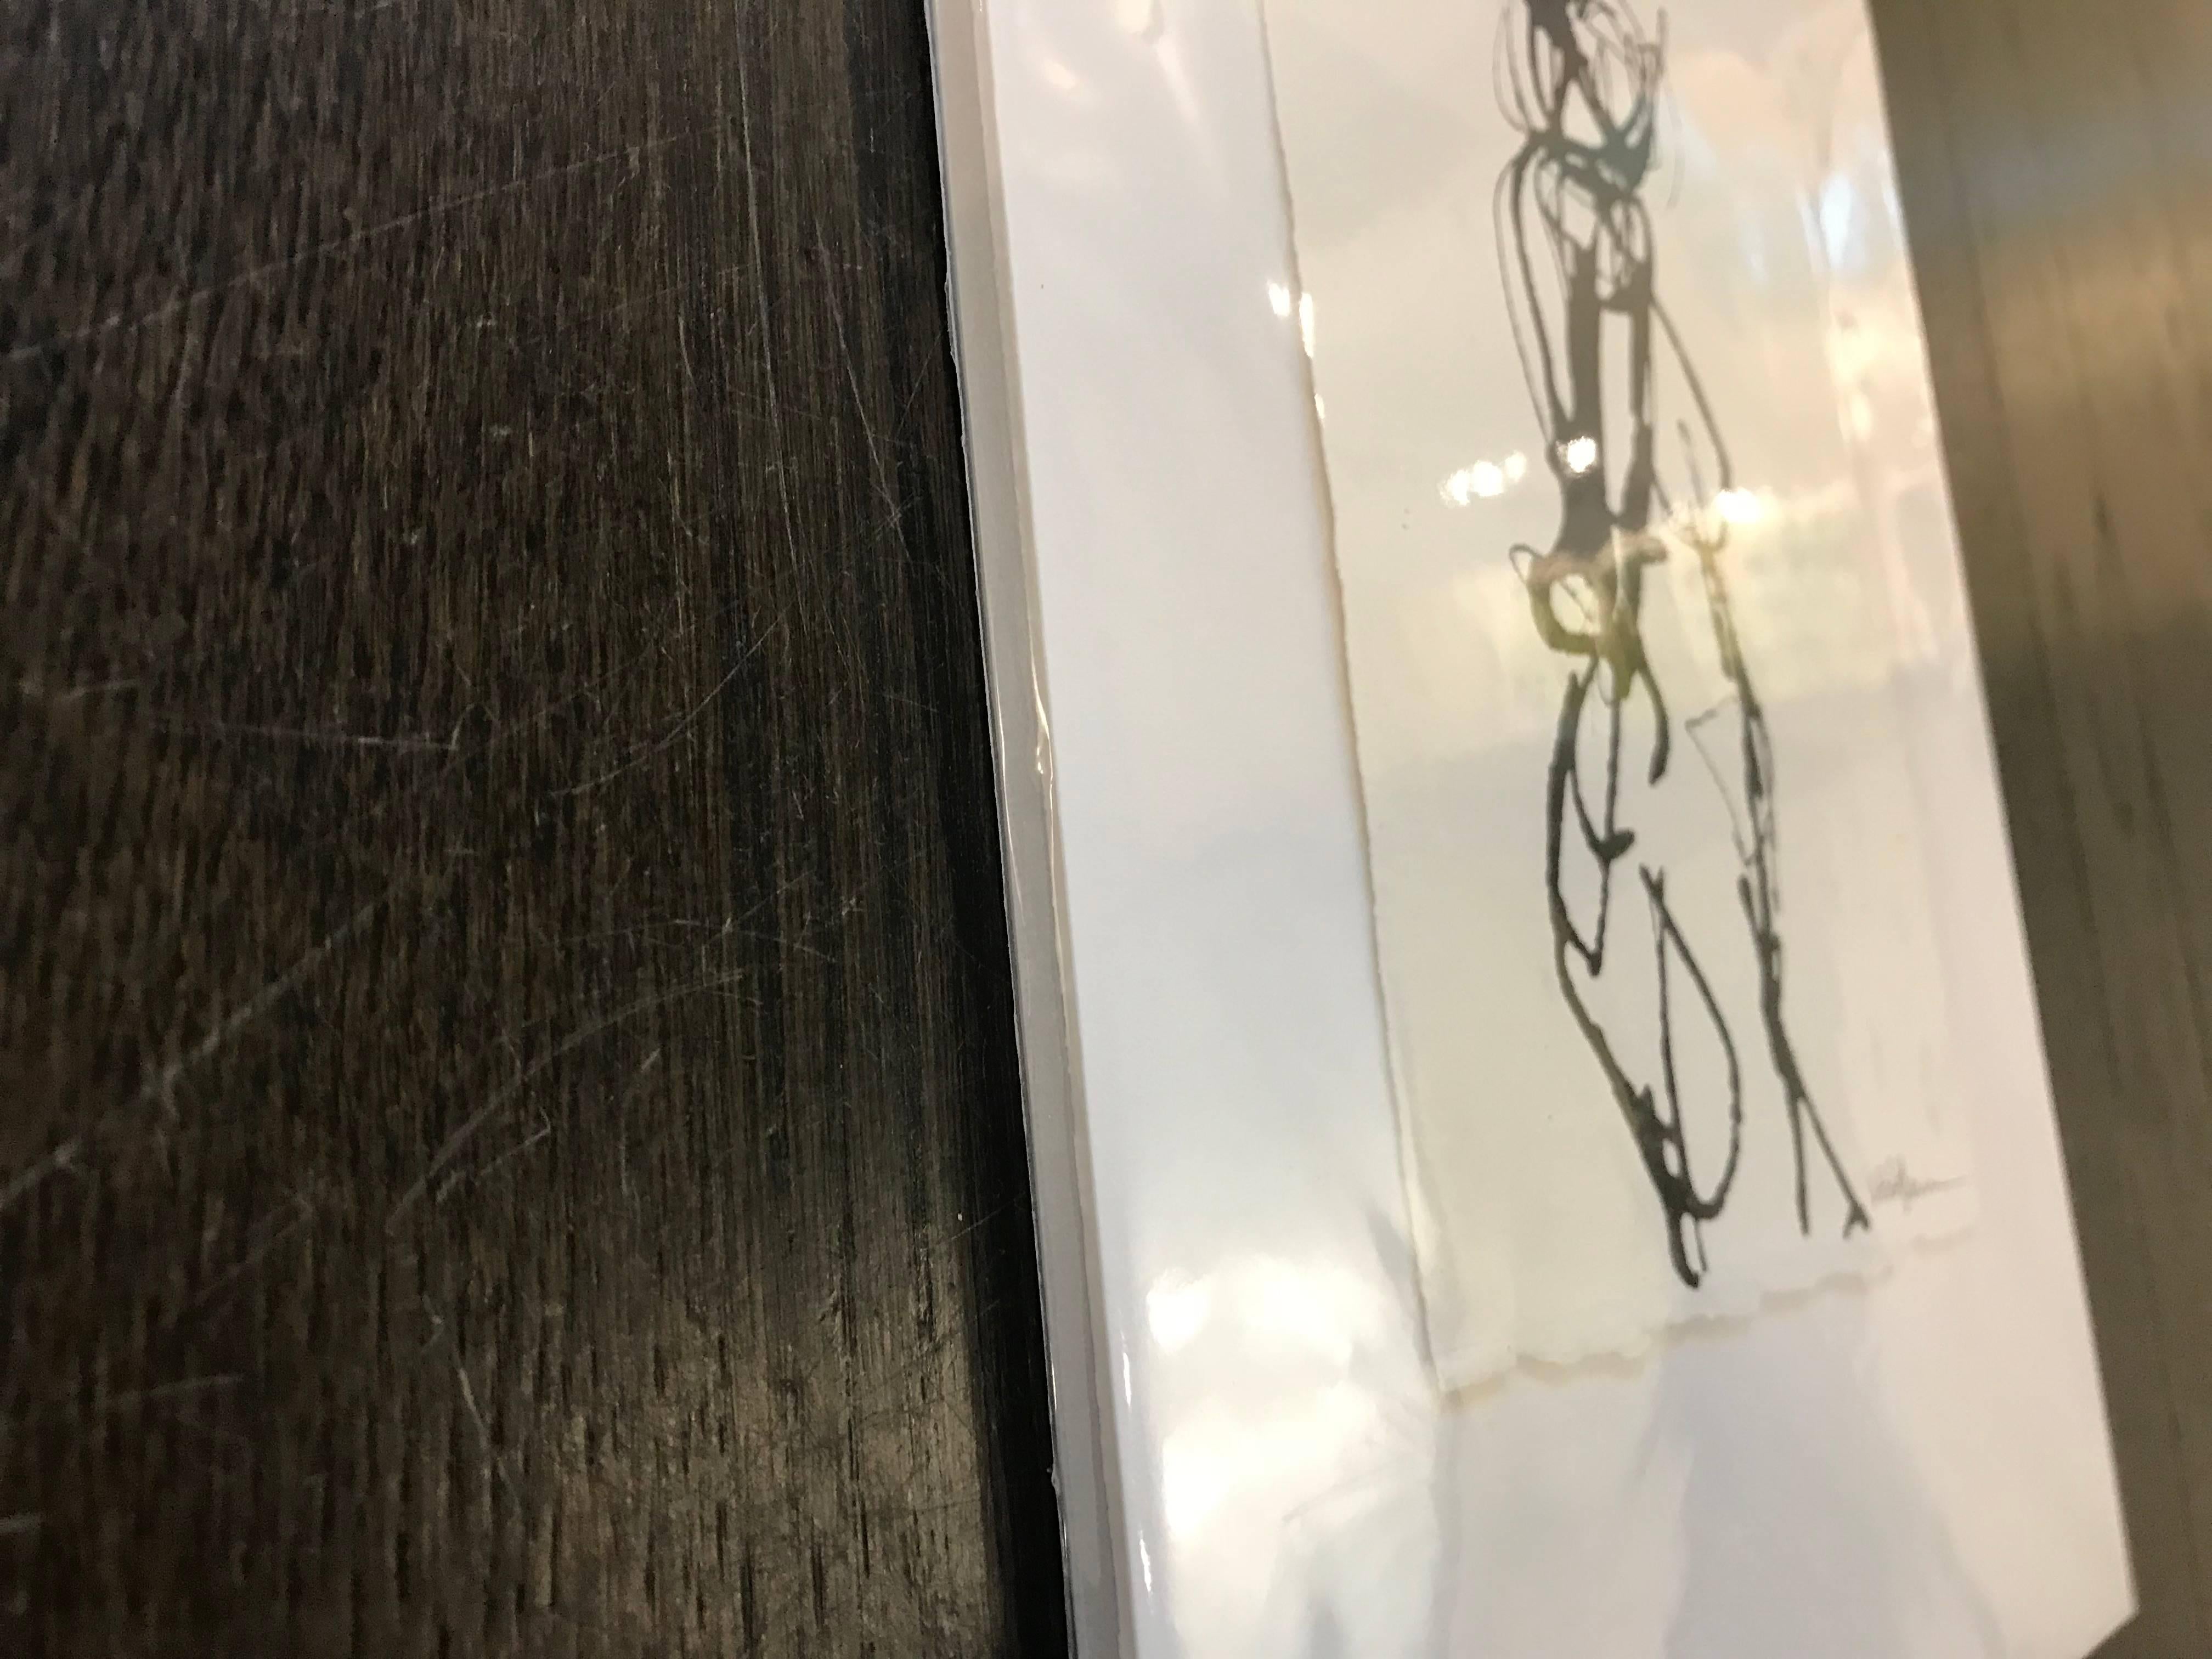 This petite ink on paper drawing depicts the right side profile view of a nude woman.  The artist has signed on the bottom right. The contour line, the application of paint, the techniques by which art is created all inspire and motivate Kelley in